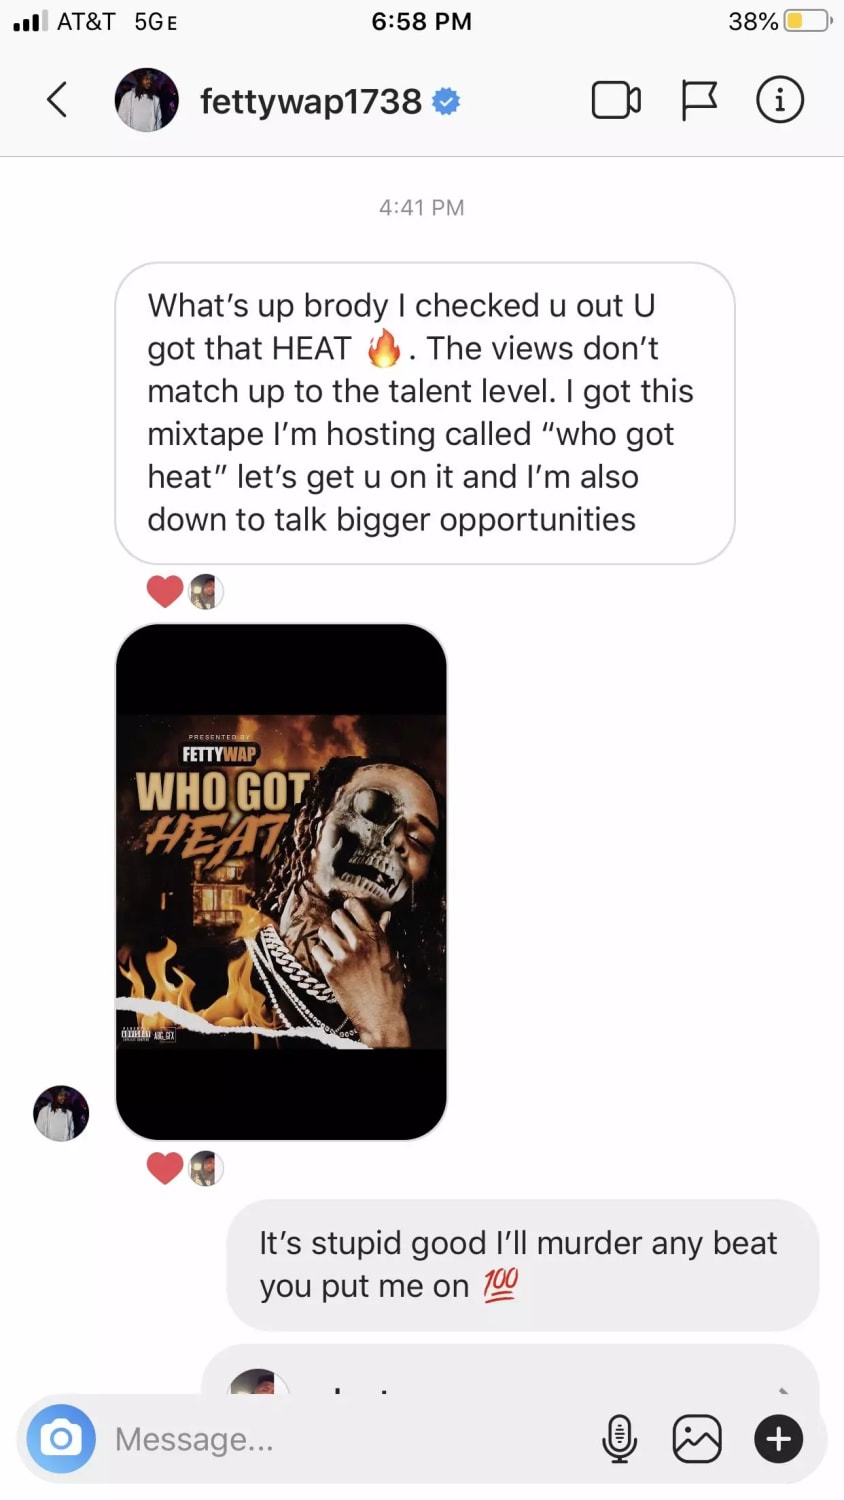 Fetty wap sent me a message saying he checked my music out and that it’s heat and he wants to get me on a mixtape he’s working on and I need to send him $500 to lock in a spot but the whole thing sounds kinda sketchy, should it do it?